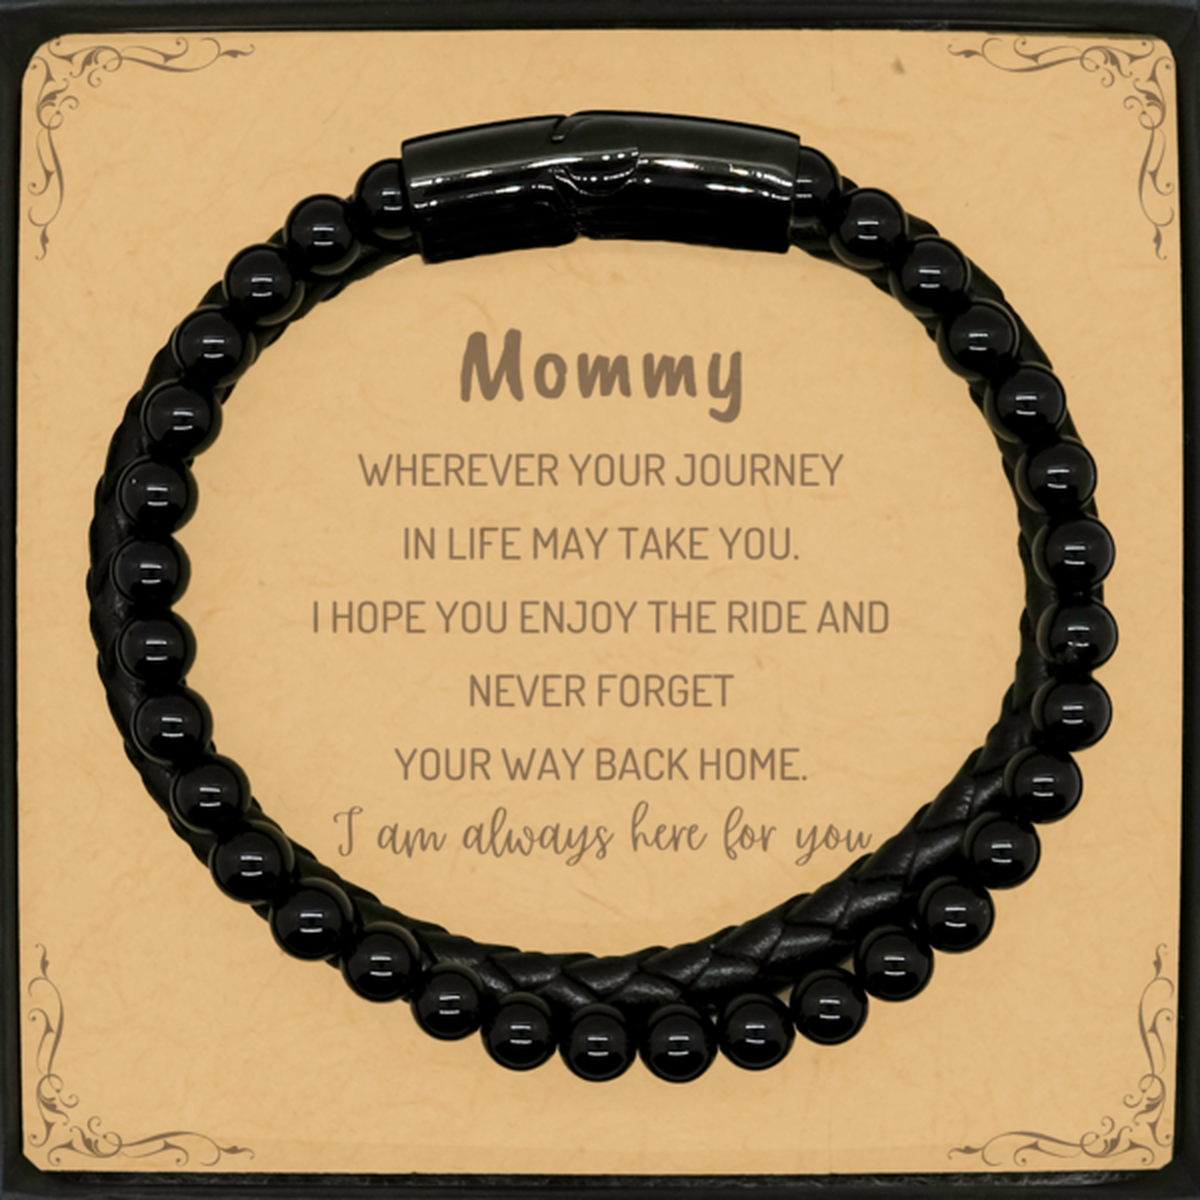 Mommy wherever your journey in life may take you, I am always here for you Mommy Stone Leather Bracelets, Awesome Christmas Gifts For Mommy Message Card, Mommy Birthday Gifts for Men Women Family Loved One